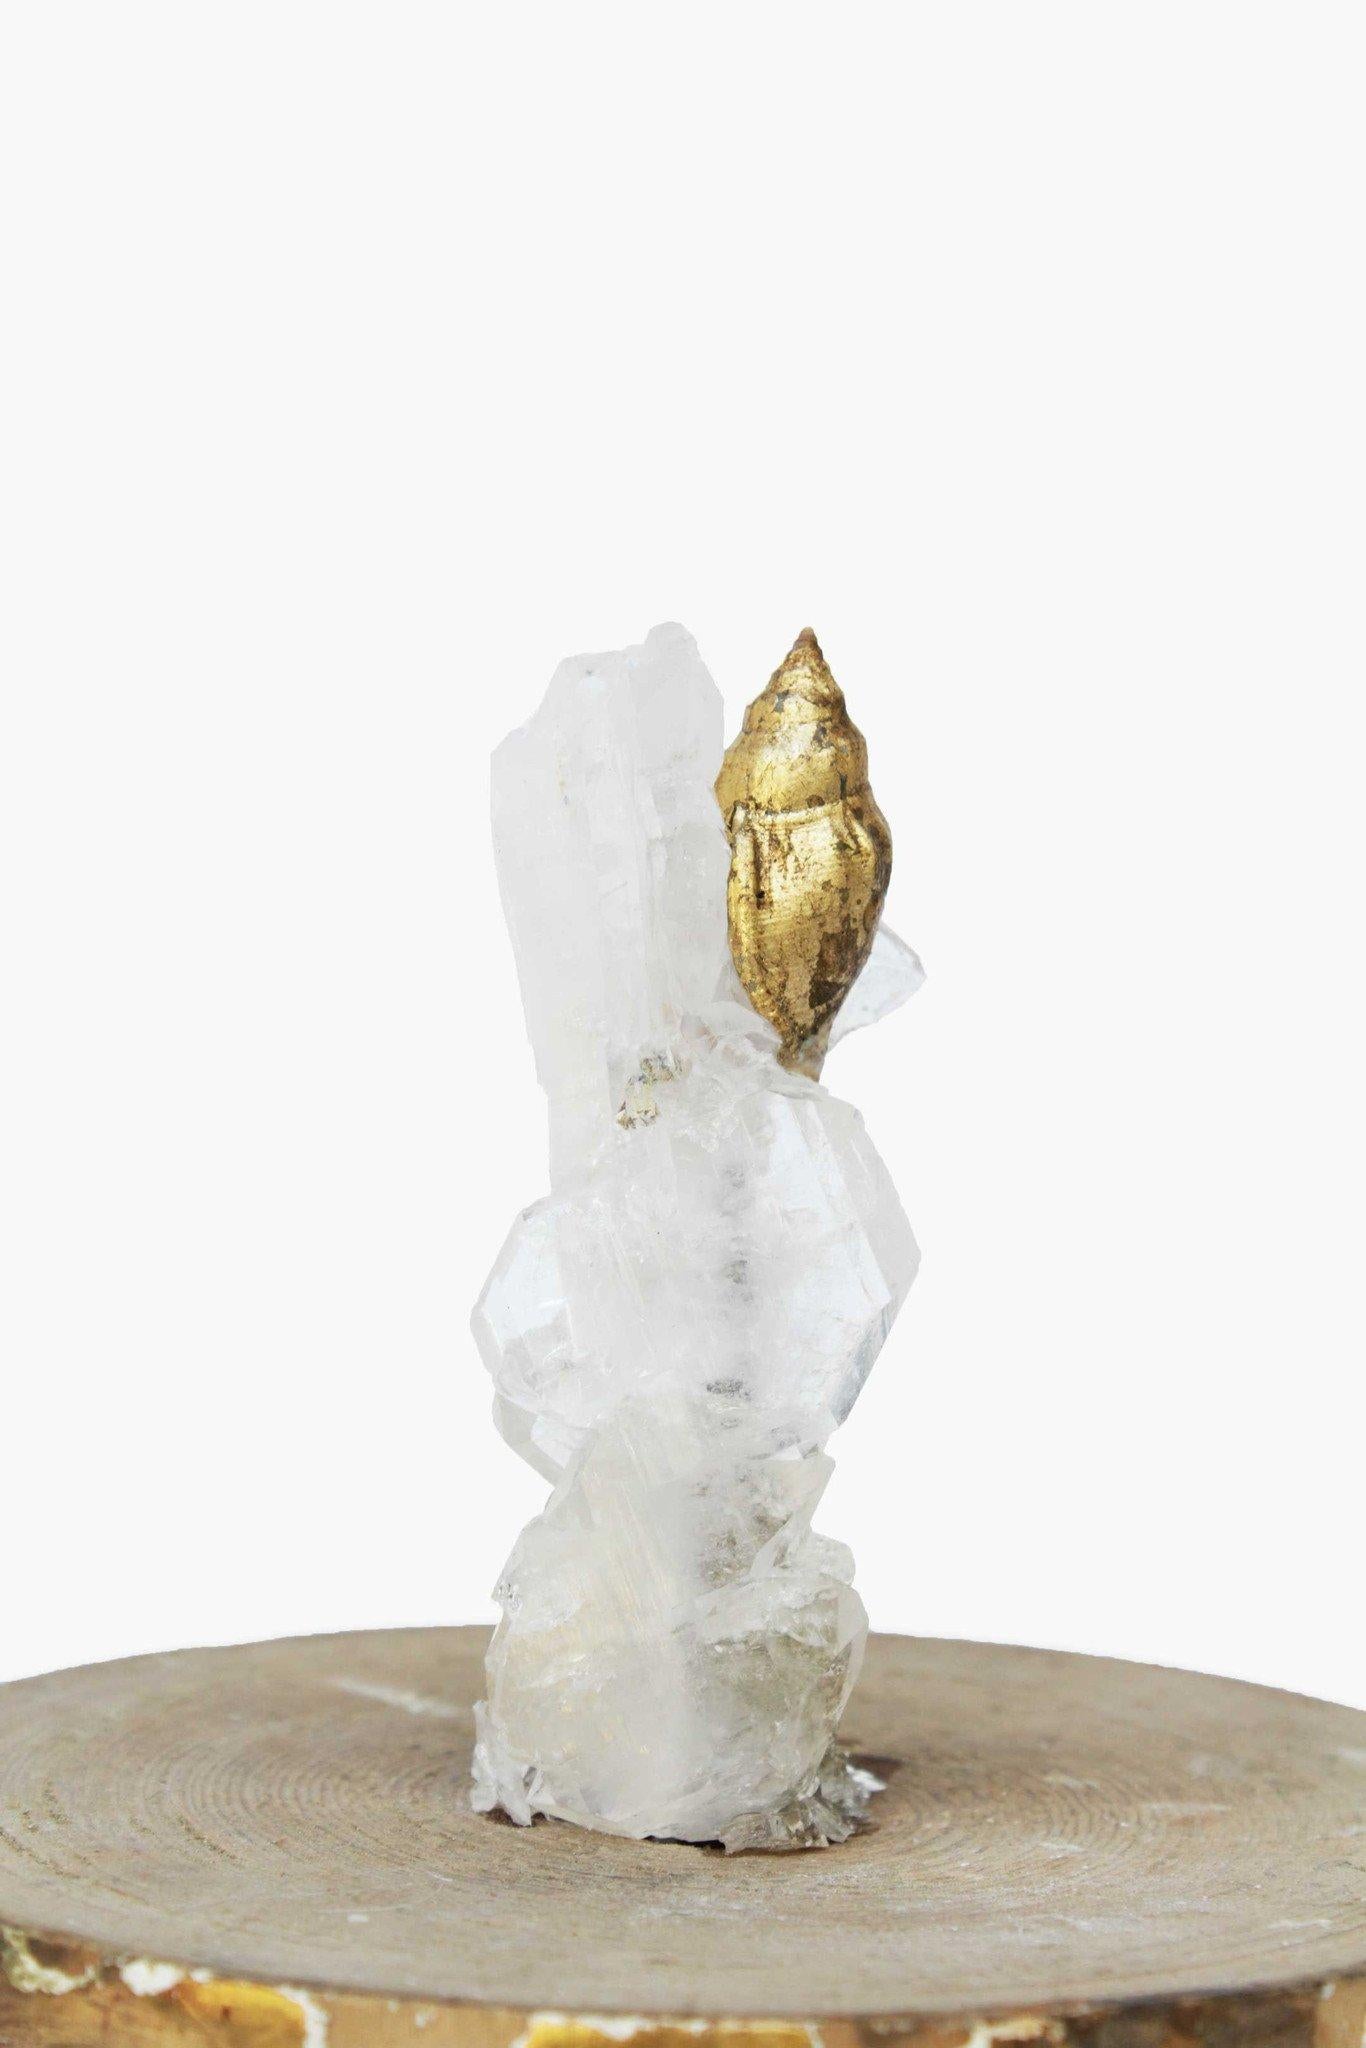 Rococo 18th Century Italian Gold Leaf Candlestick with Faden Crystal on a Calcite Base